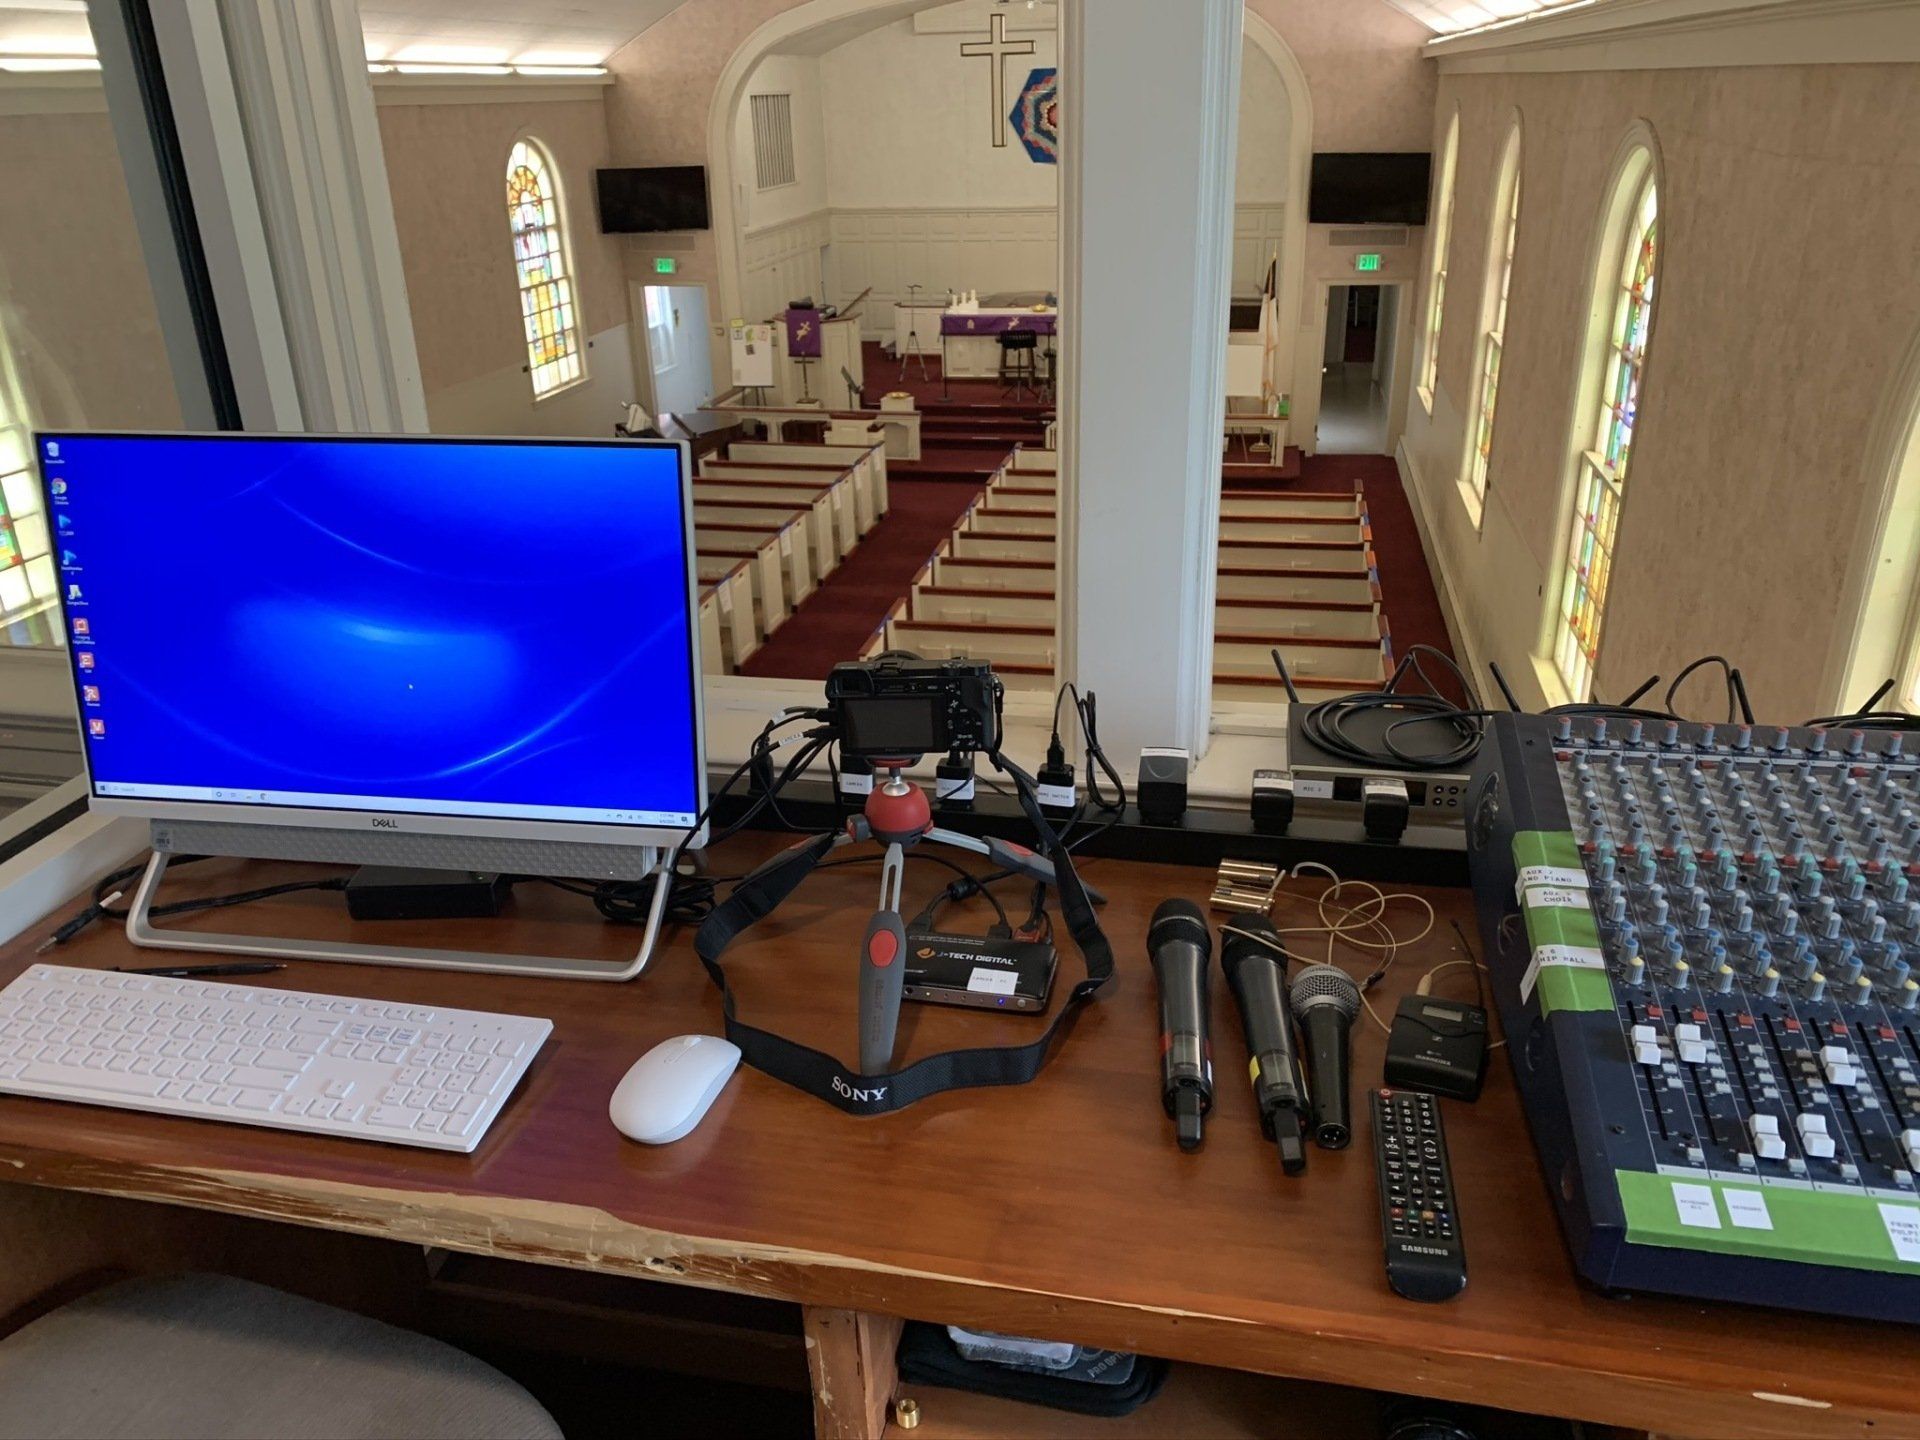 A computer monitor is sitting on a wooden desk in a church.